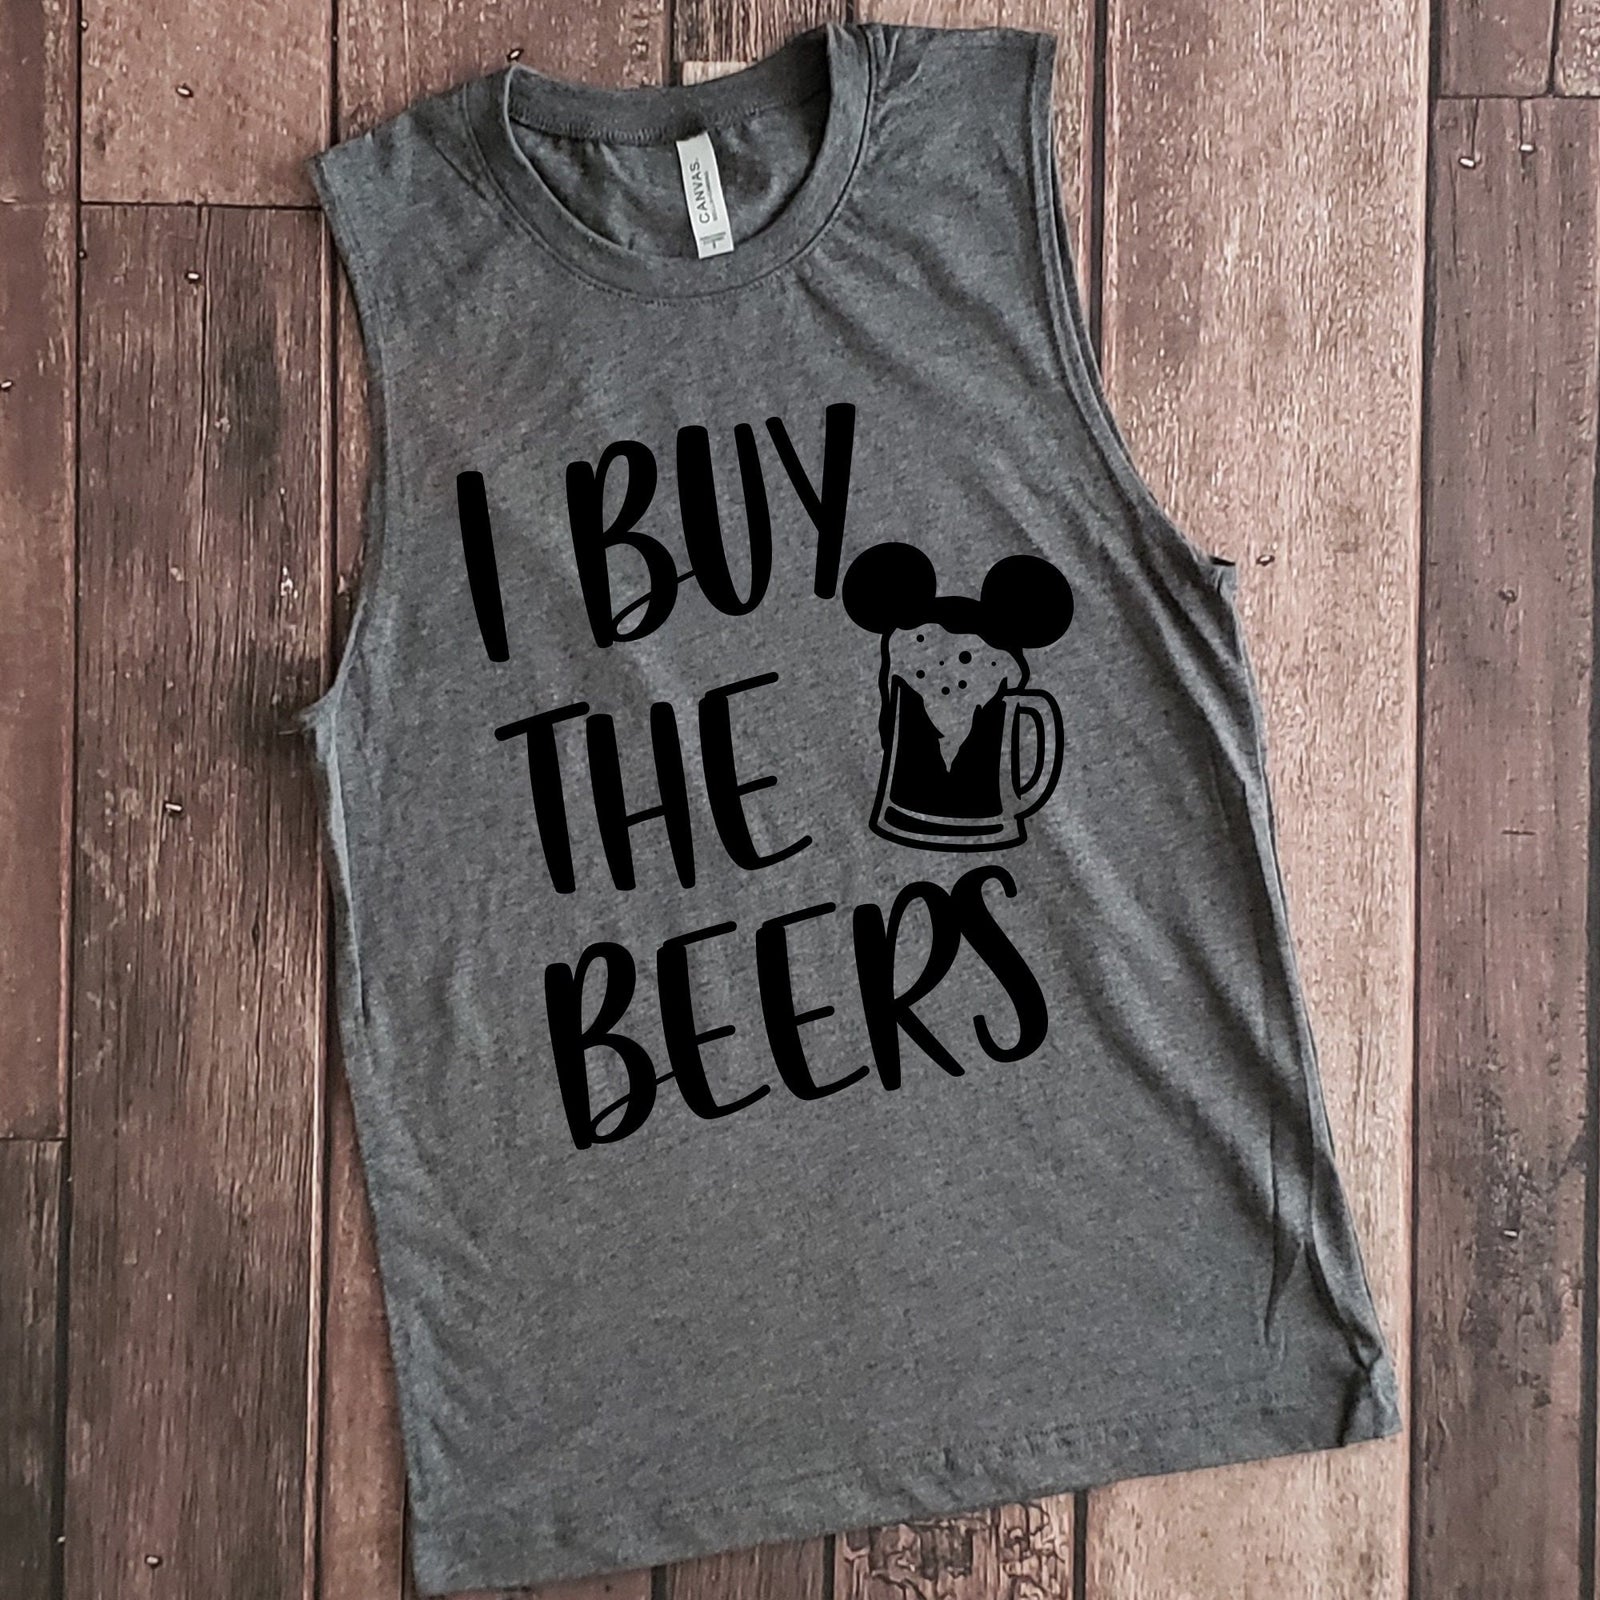 I Buy the Beers Adult Muscle Tank Top- Epcot Food and Wine Festival - Fun Disney Shirt for  Men